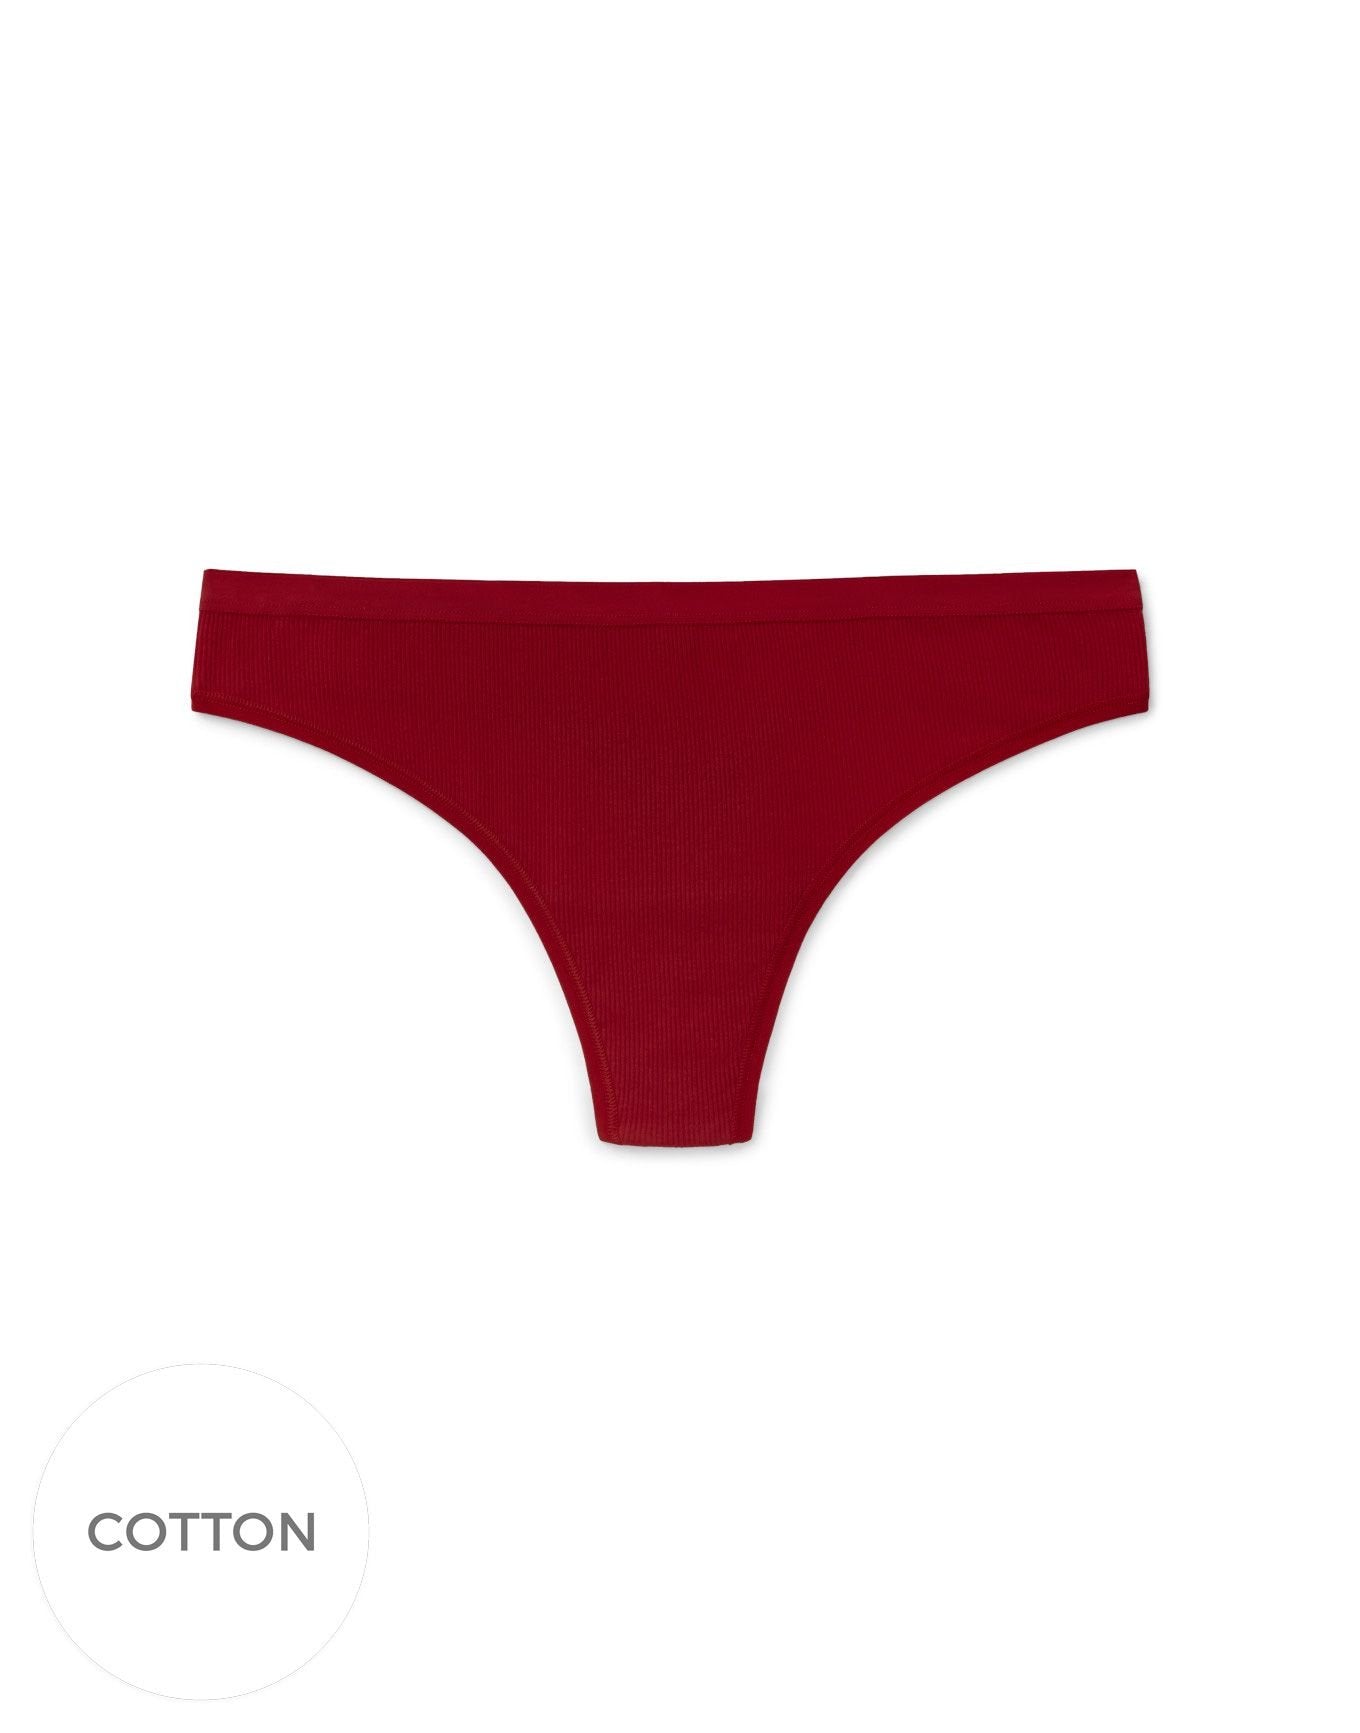 Adore Me Alexandra Ribbed Cotton Thong in color Desire 99O0 and shape thong